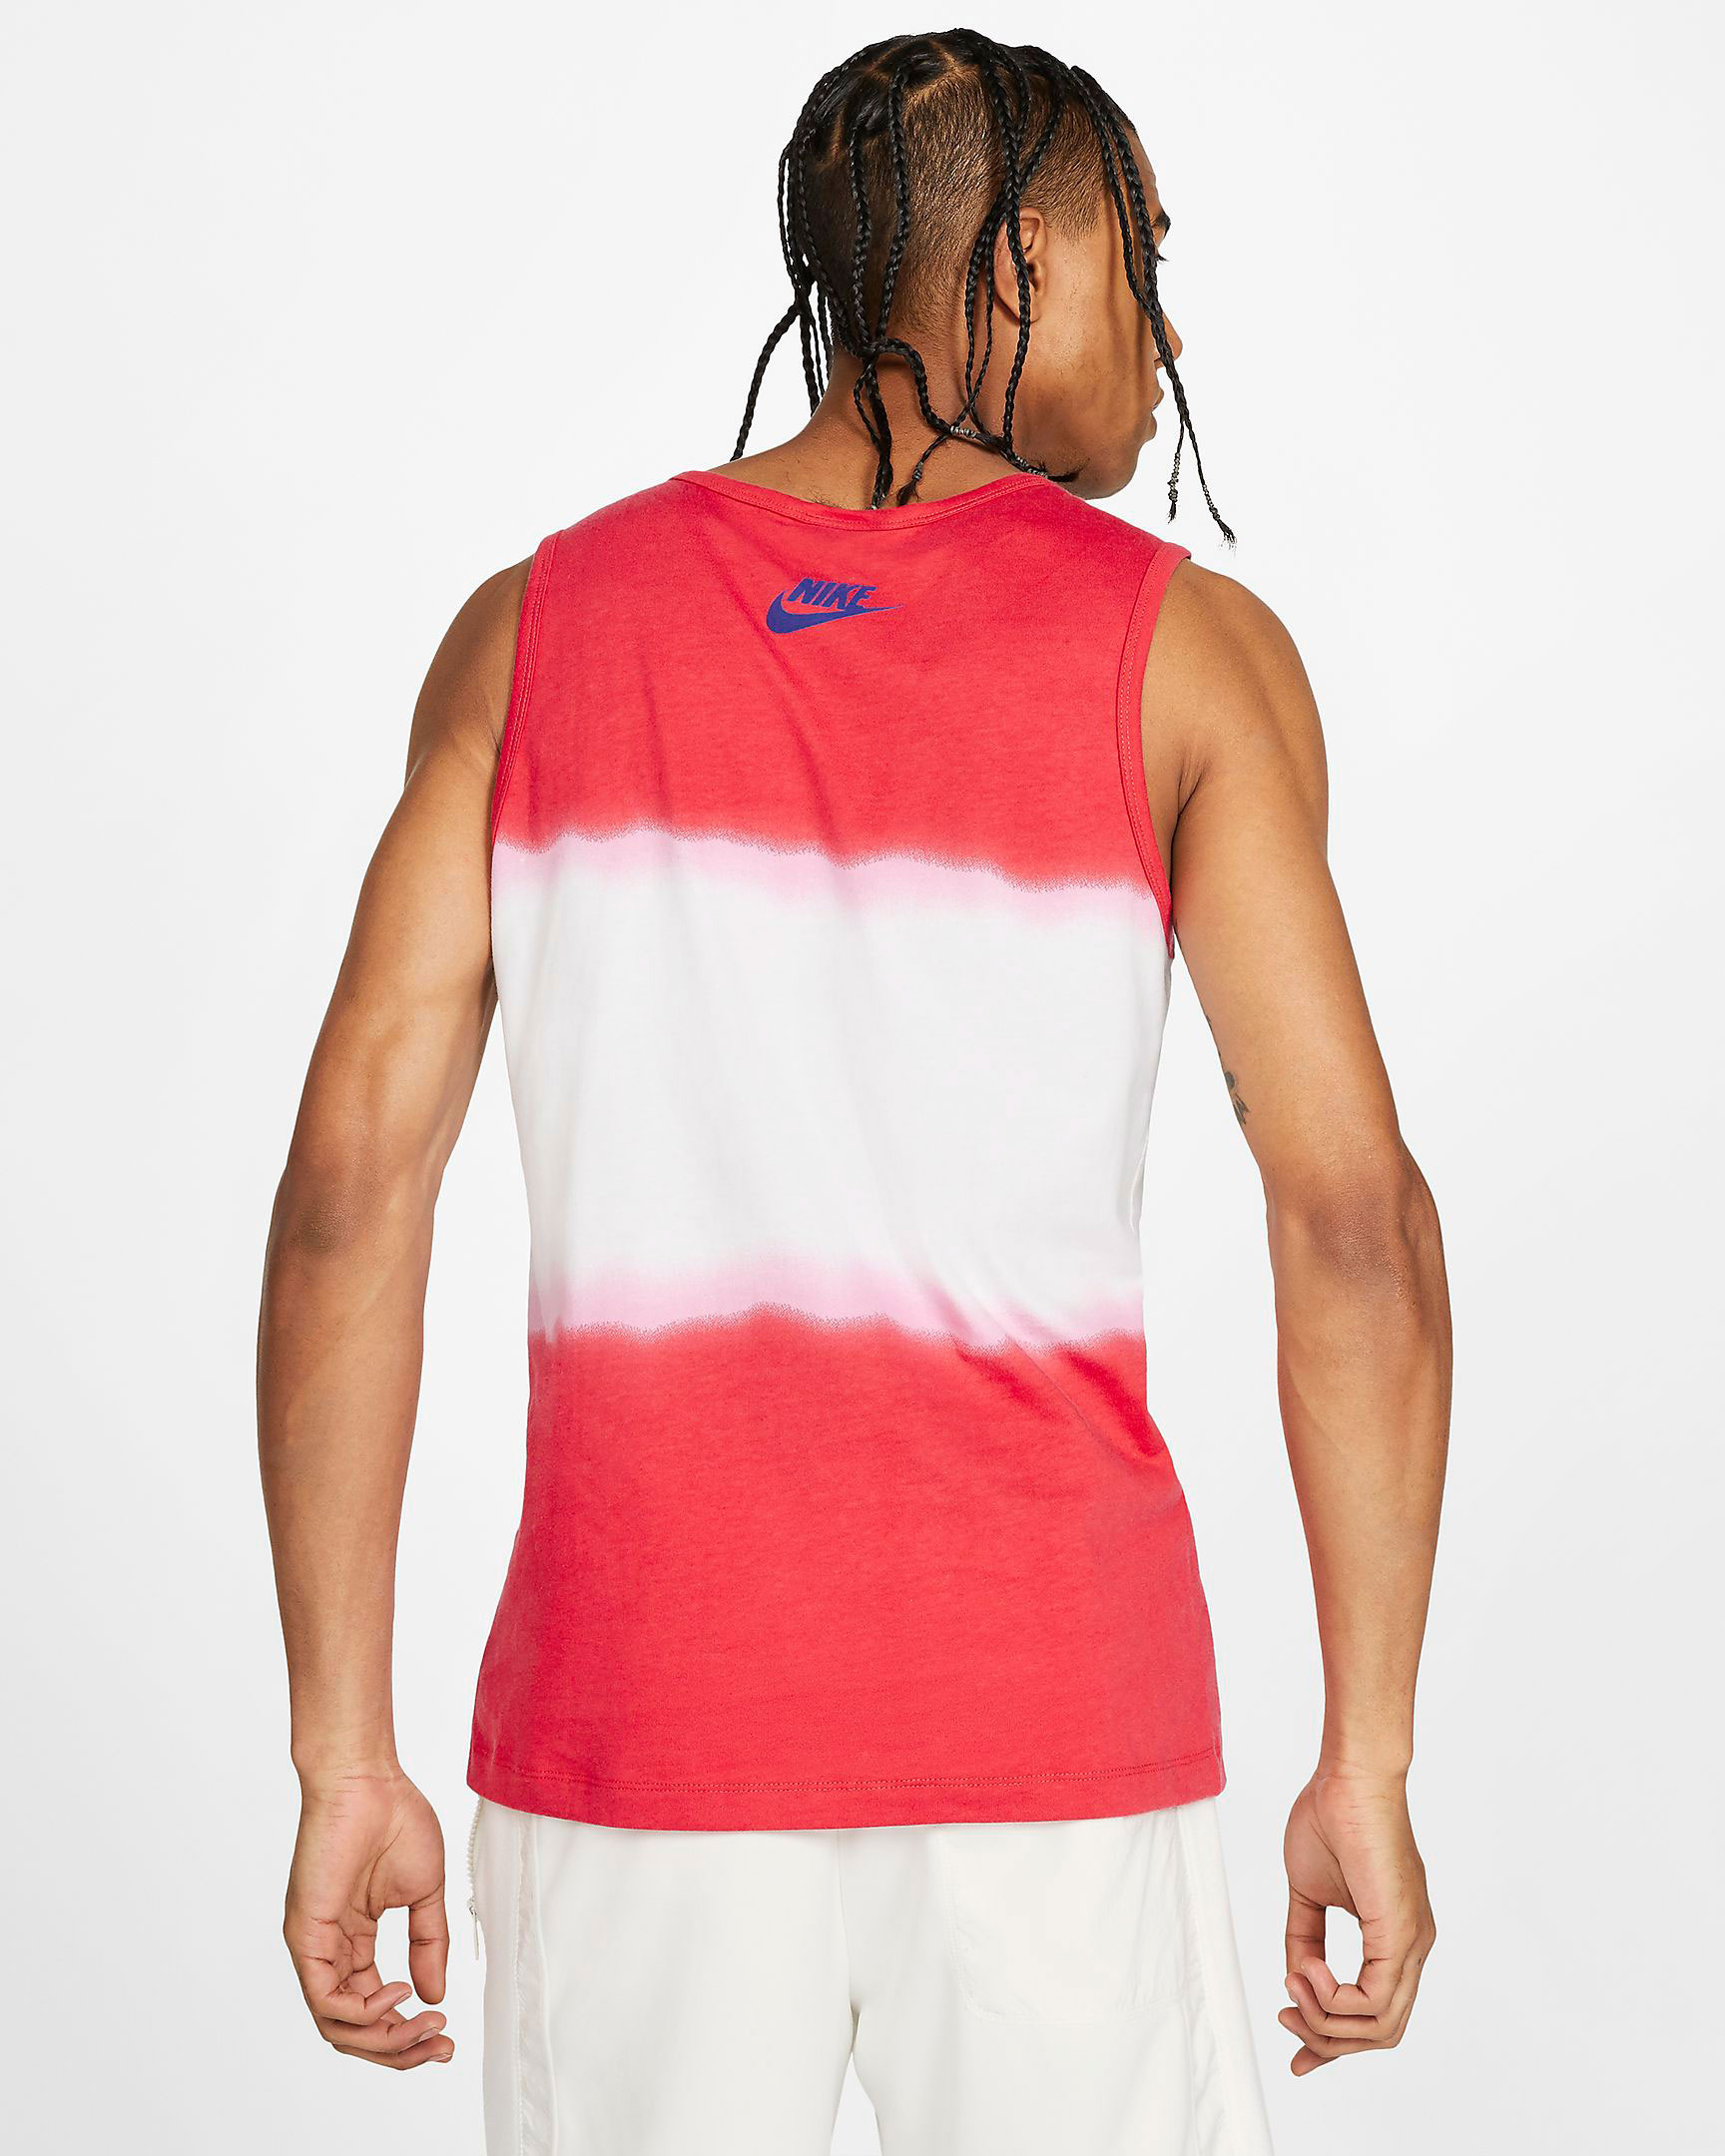 nike-kybrid-s2-what-the-usa-tank-top-2